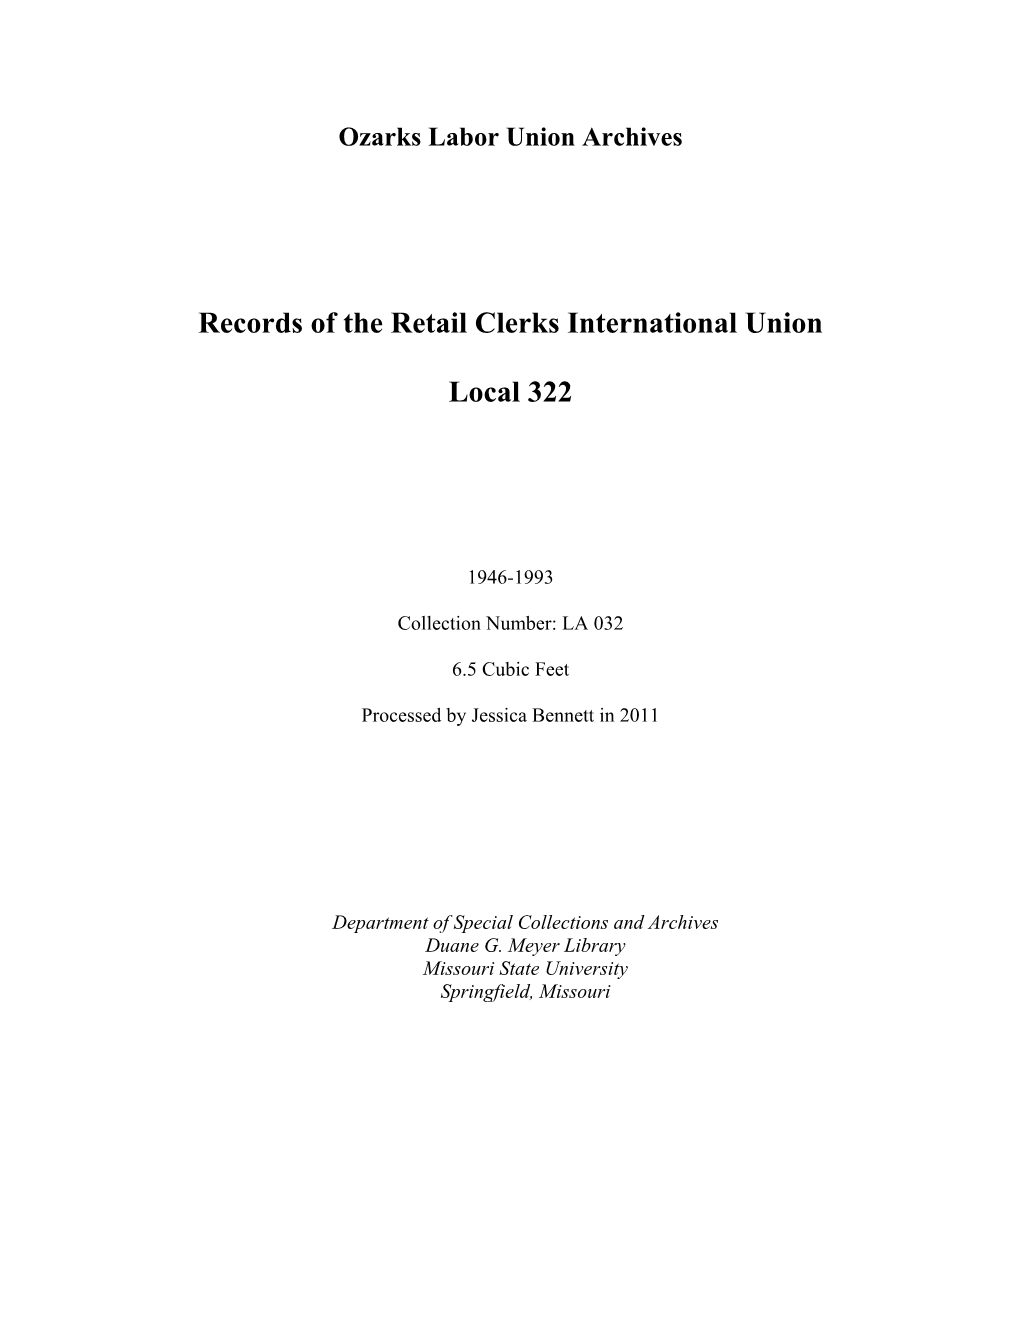 Records of the Retail Clerks International Union Local 322 Were Received from Neal Moore Prior to the Establishment of the Archives in 1998